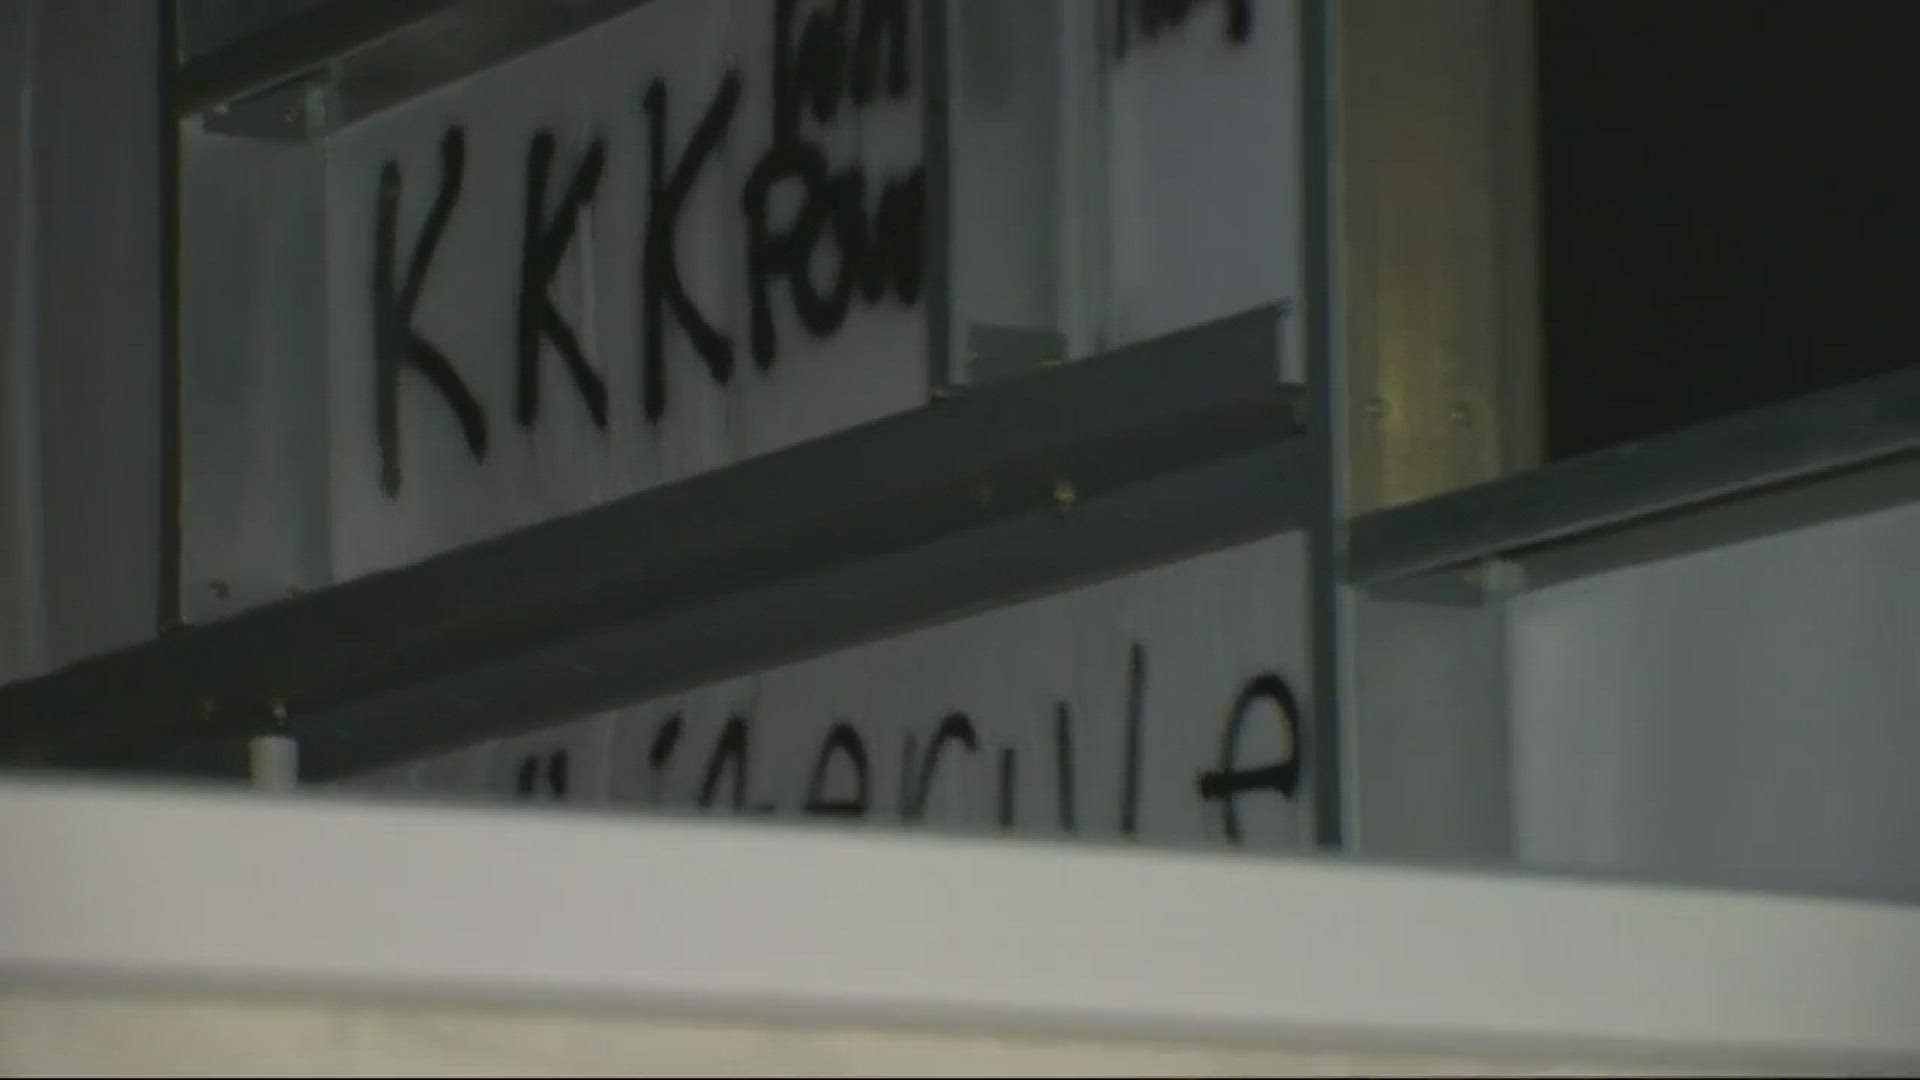 A new facility for a church in Galveston was vandalized with messages of hate.